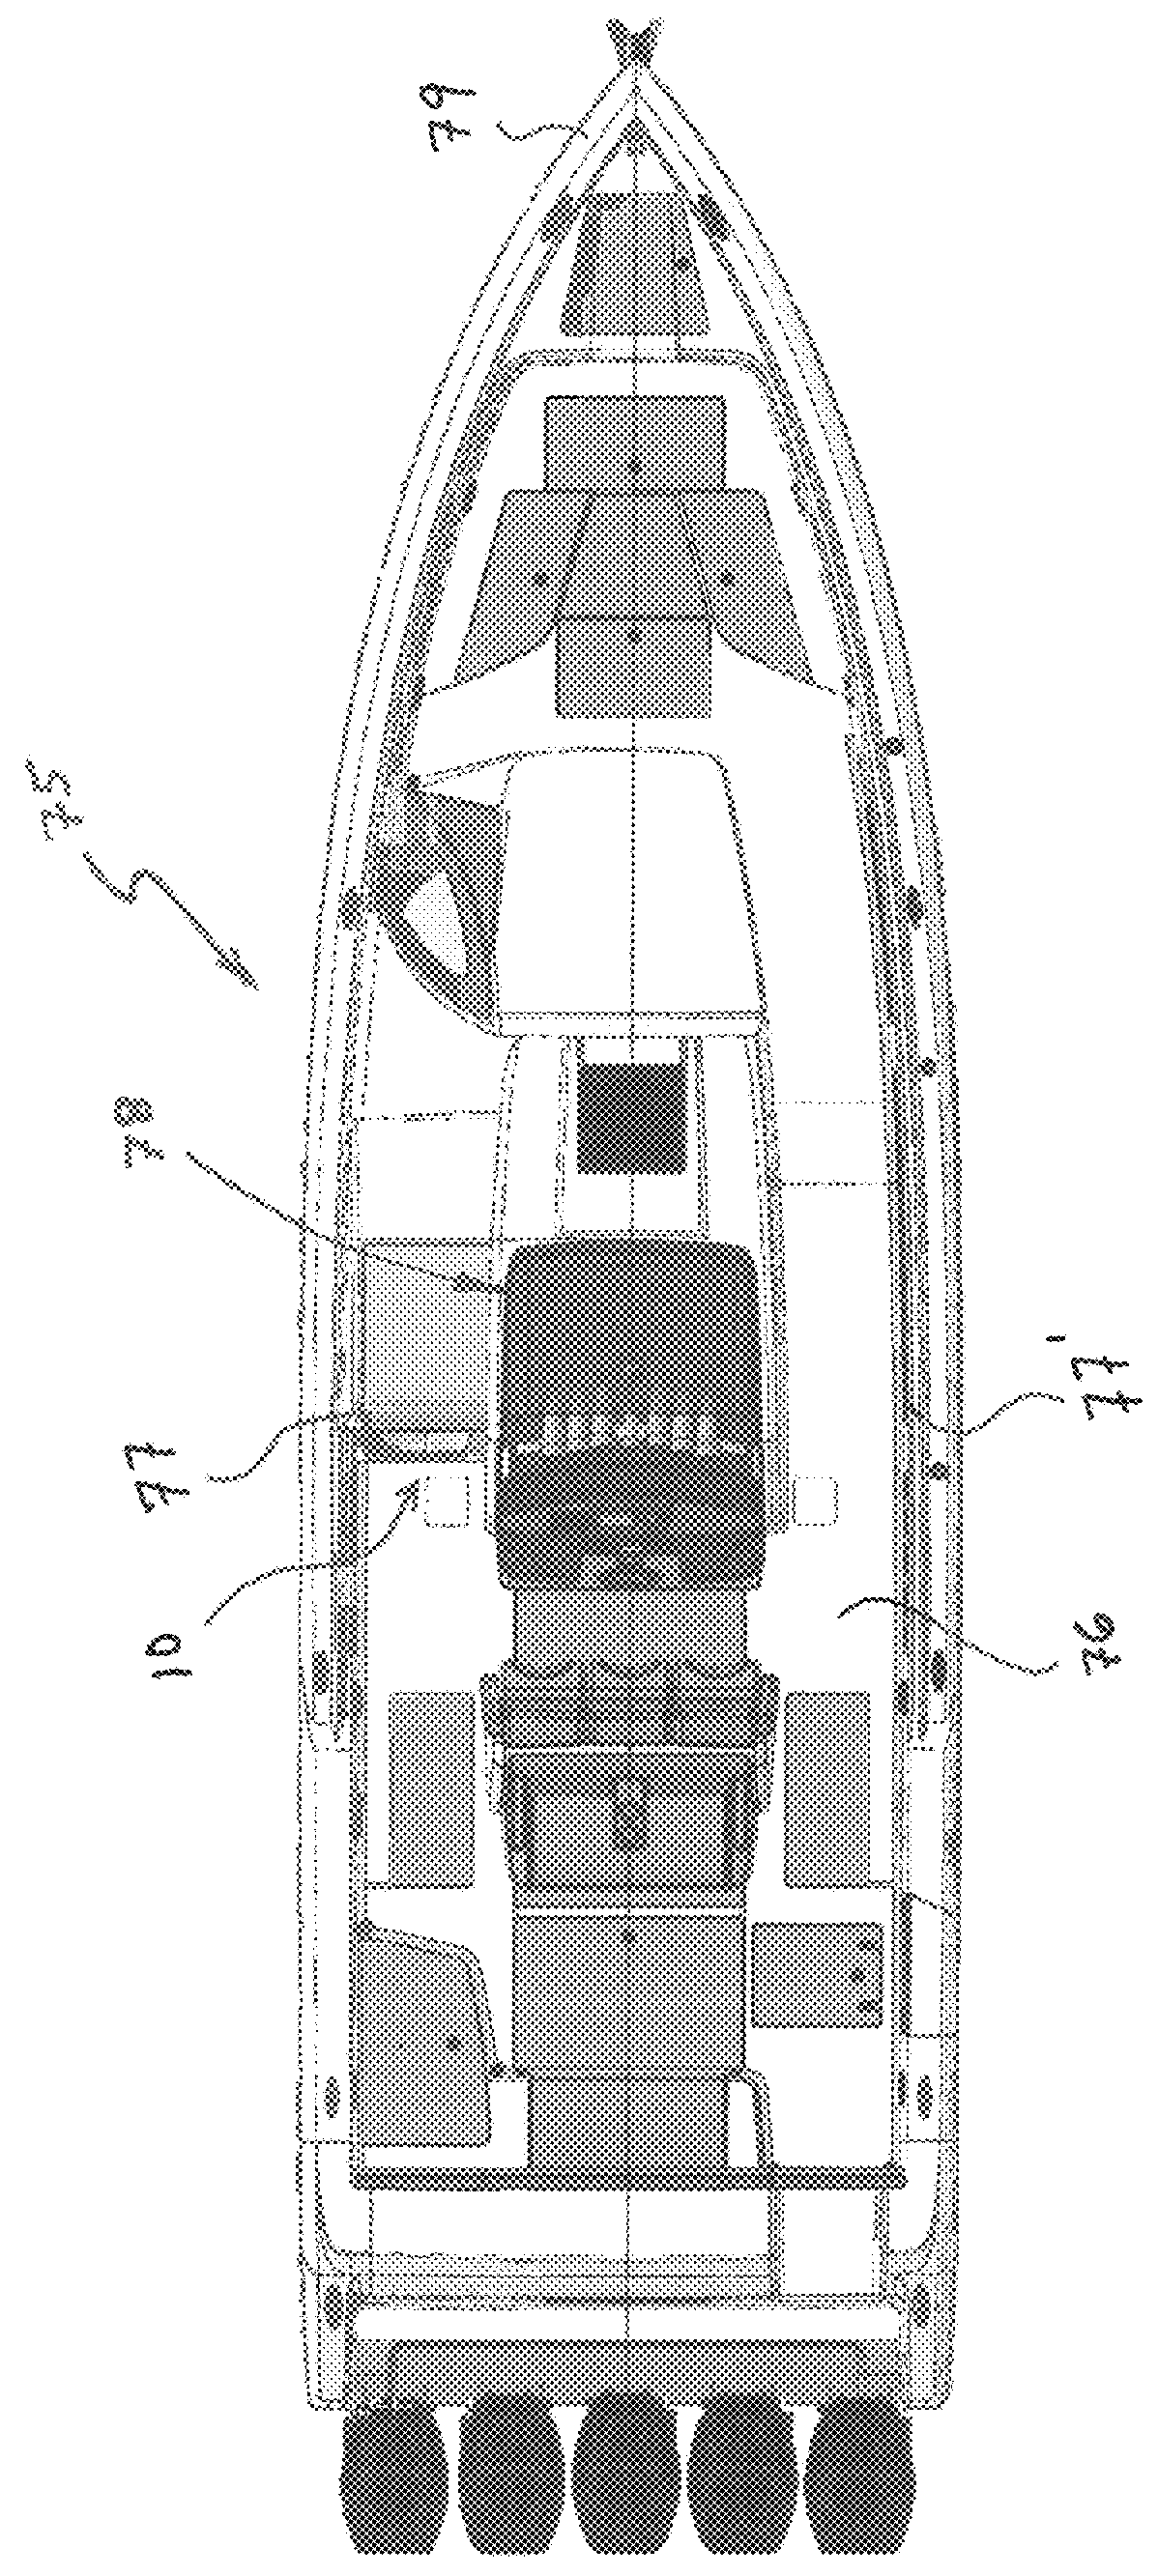 Underdeck mid-cabin entry system for mono hull boat